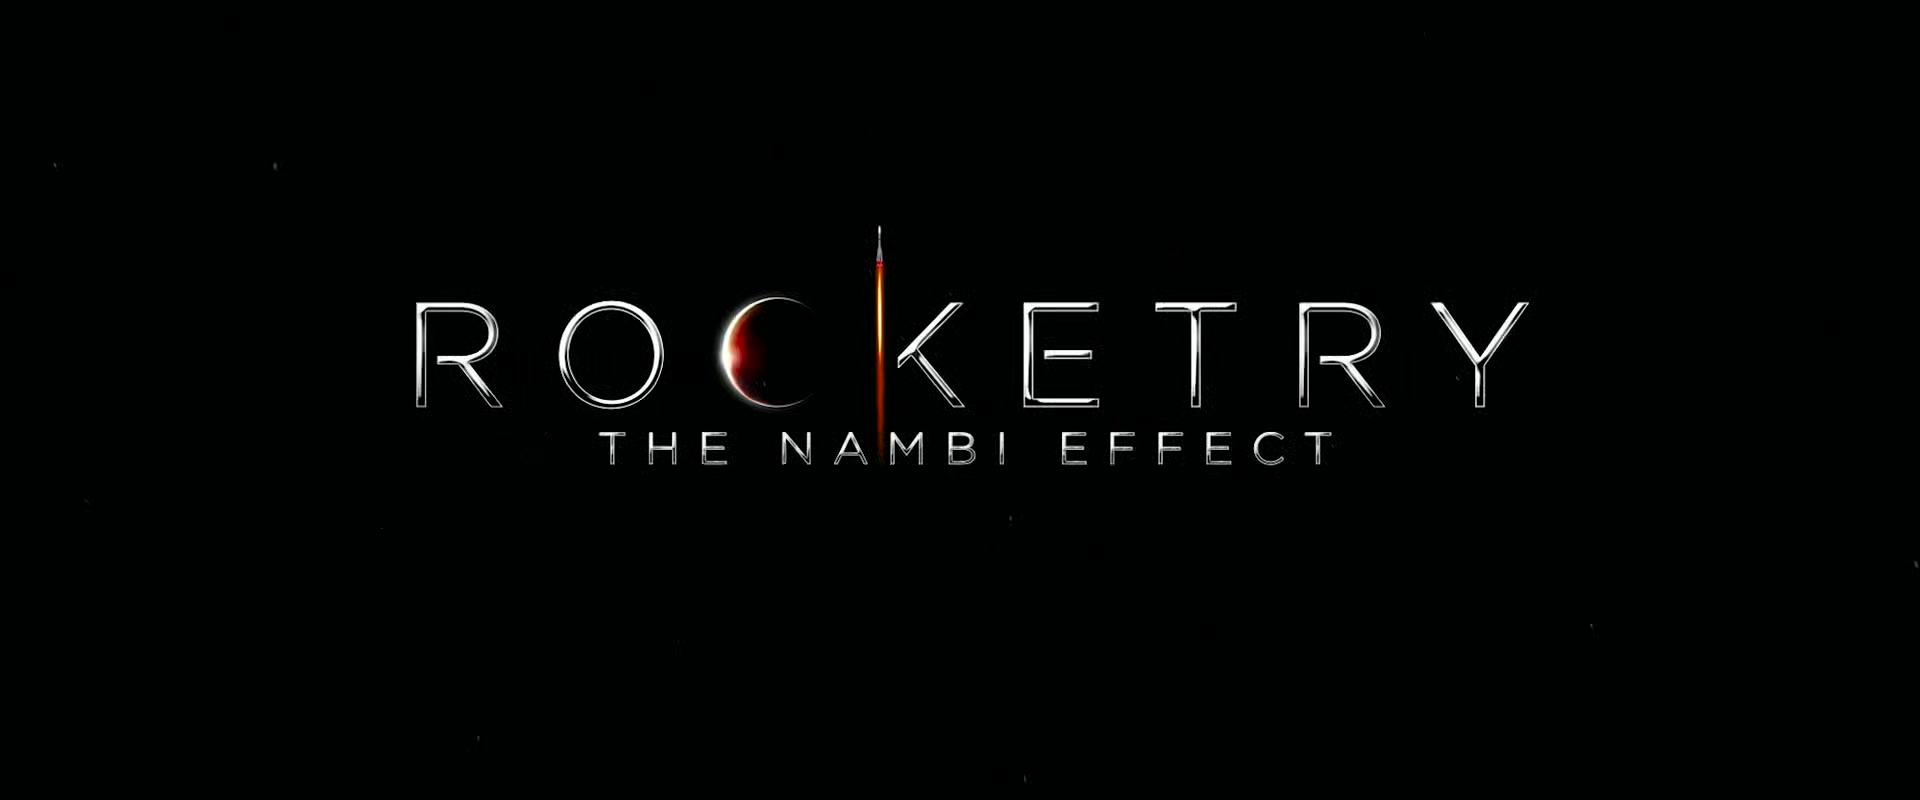 Rocketry: The Nambi Effect (2022) 1080p WEB-DL AVC DDP 5 1 Multi Audios-DUS Exclusive